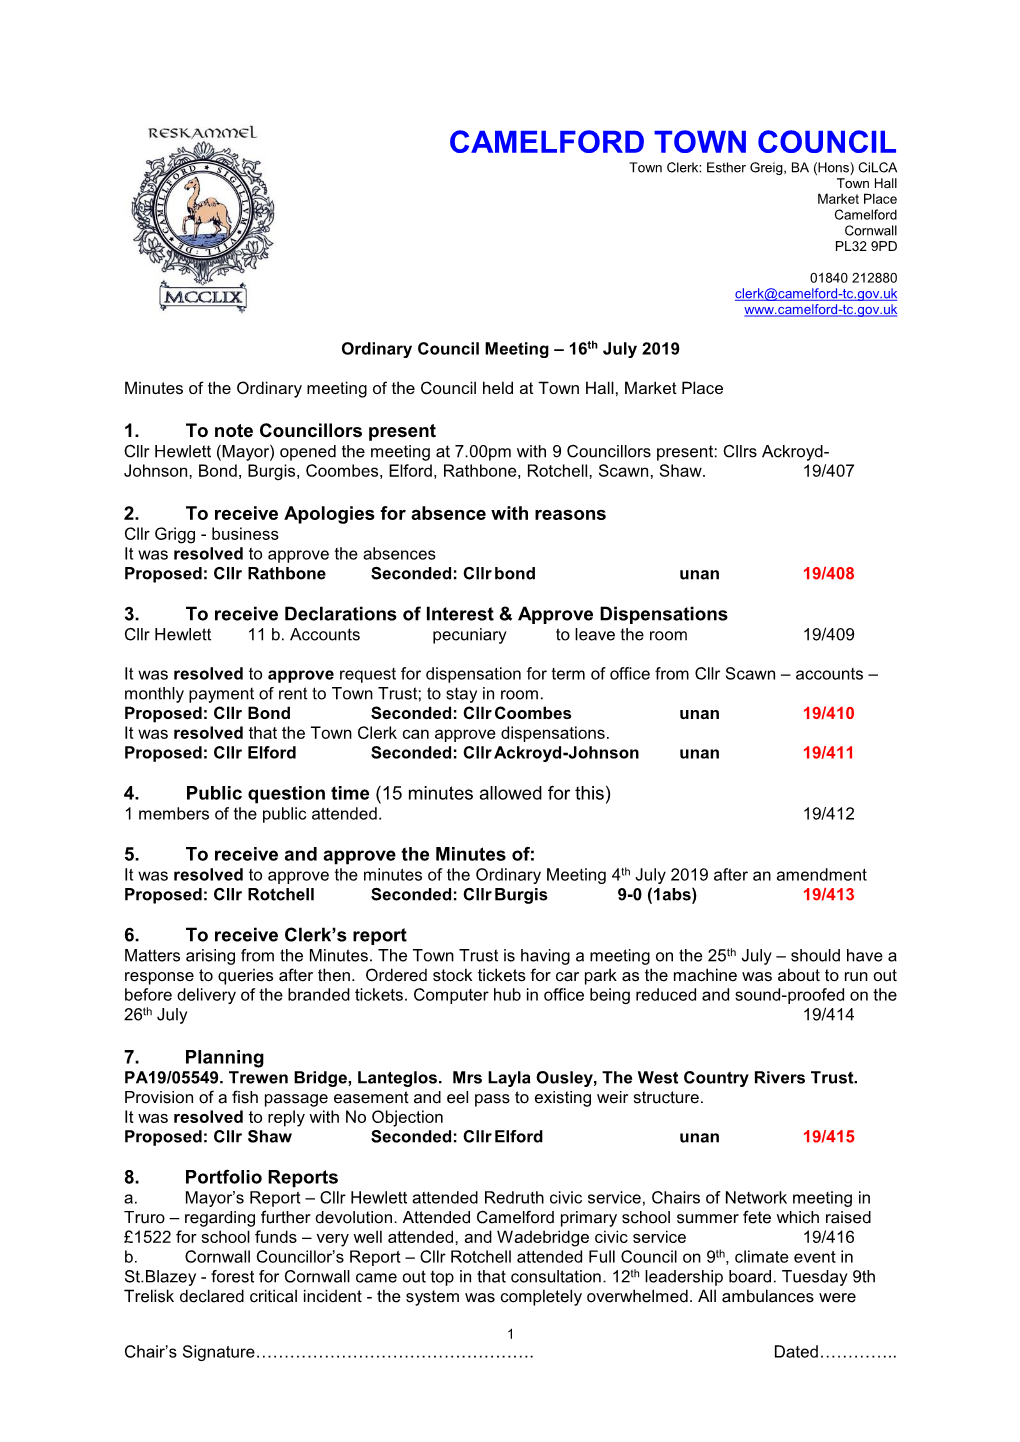 Download 16 July 2019 Minutes of the Council Meeting